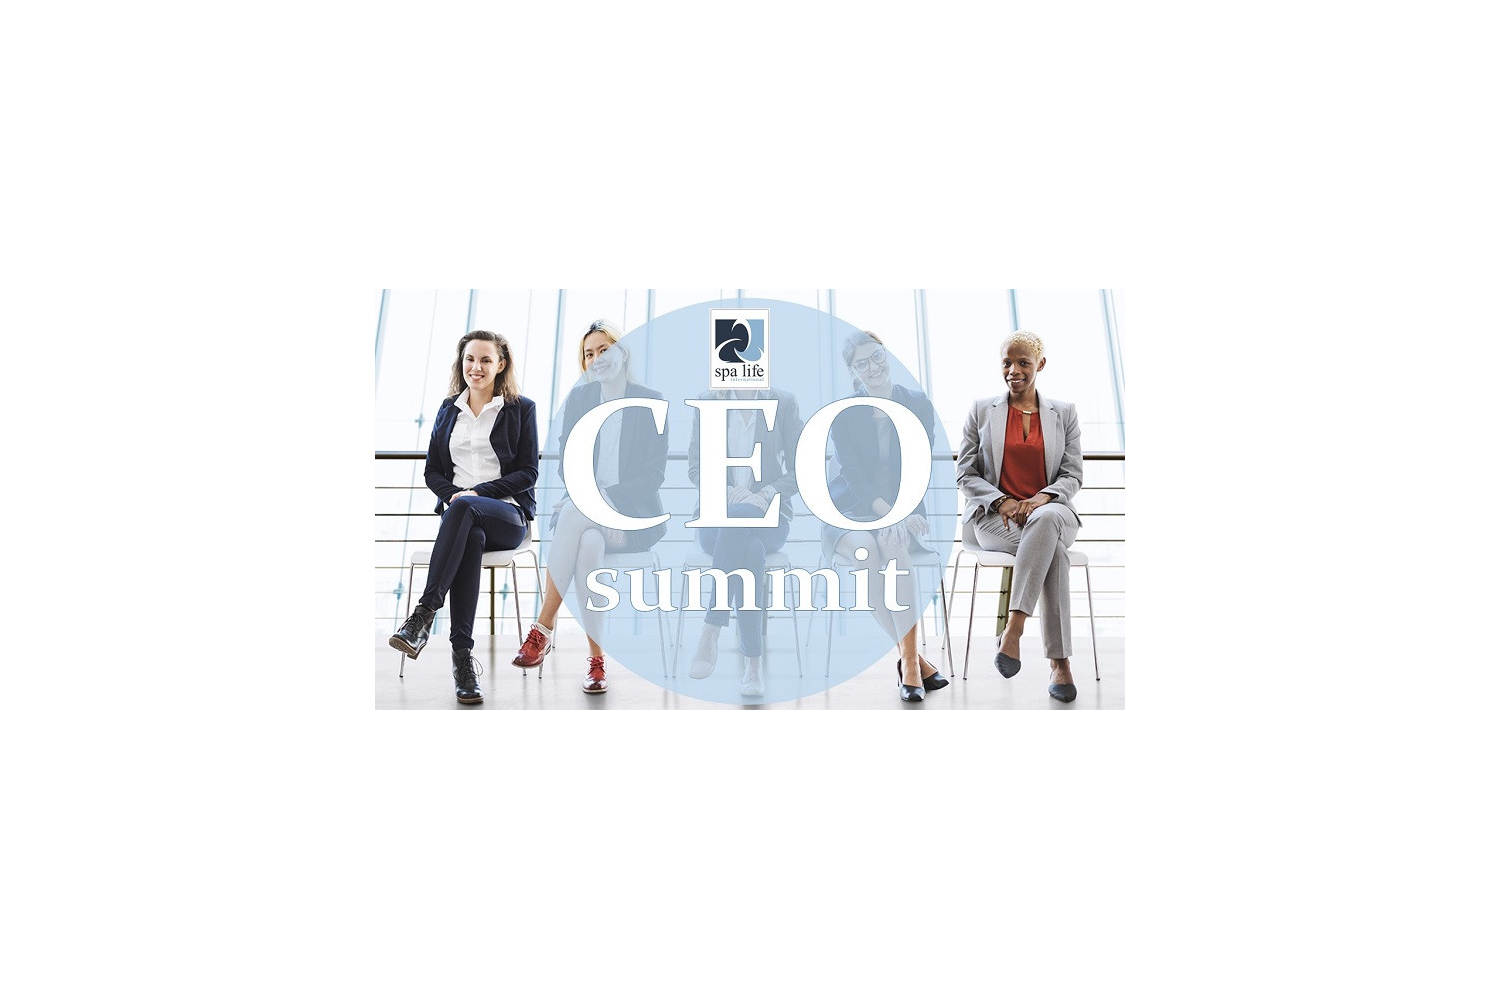 CEO Summit returns to Spa Life